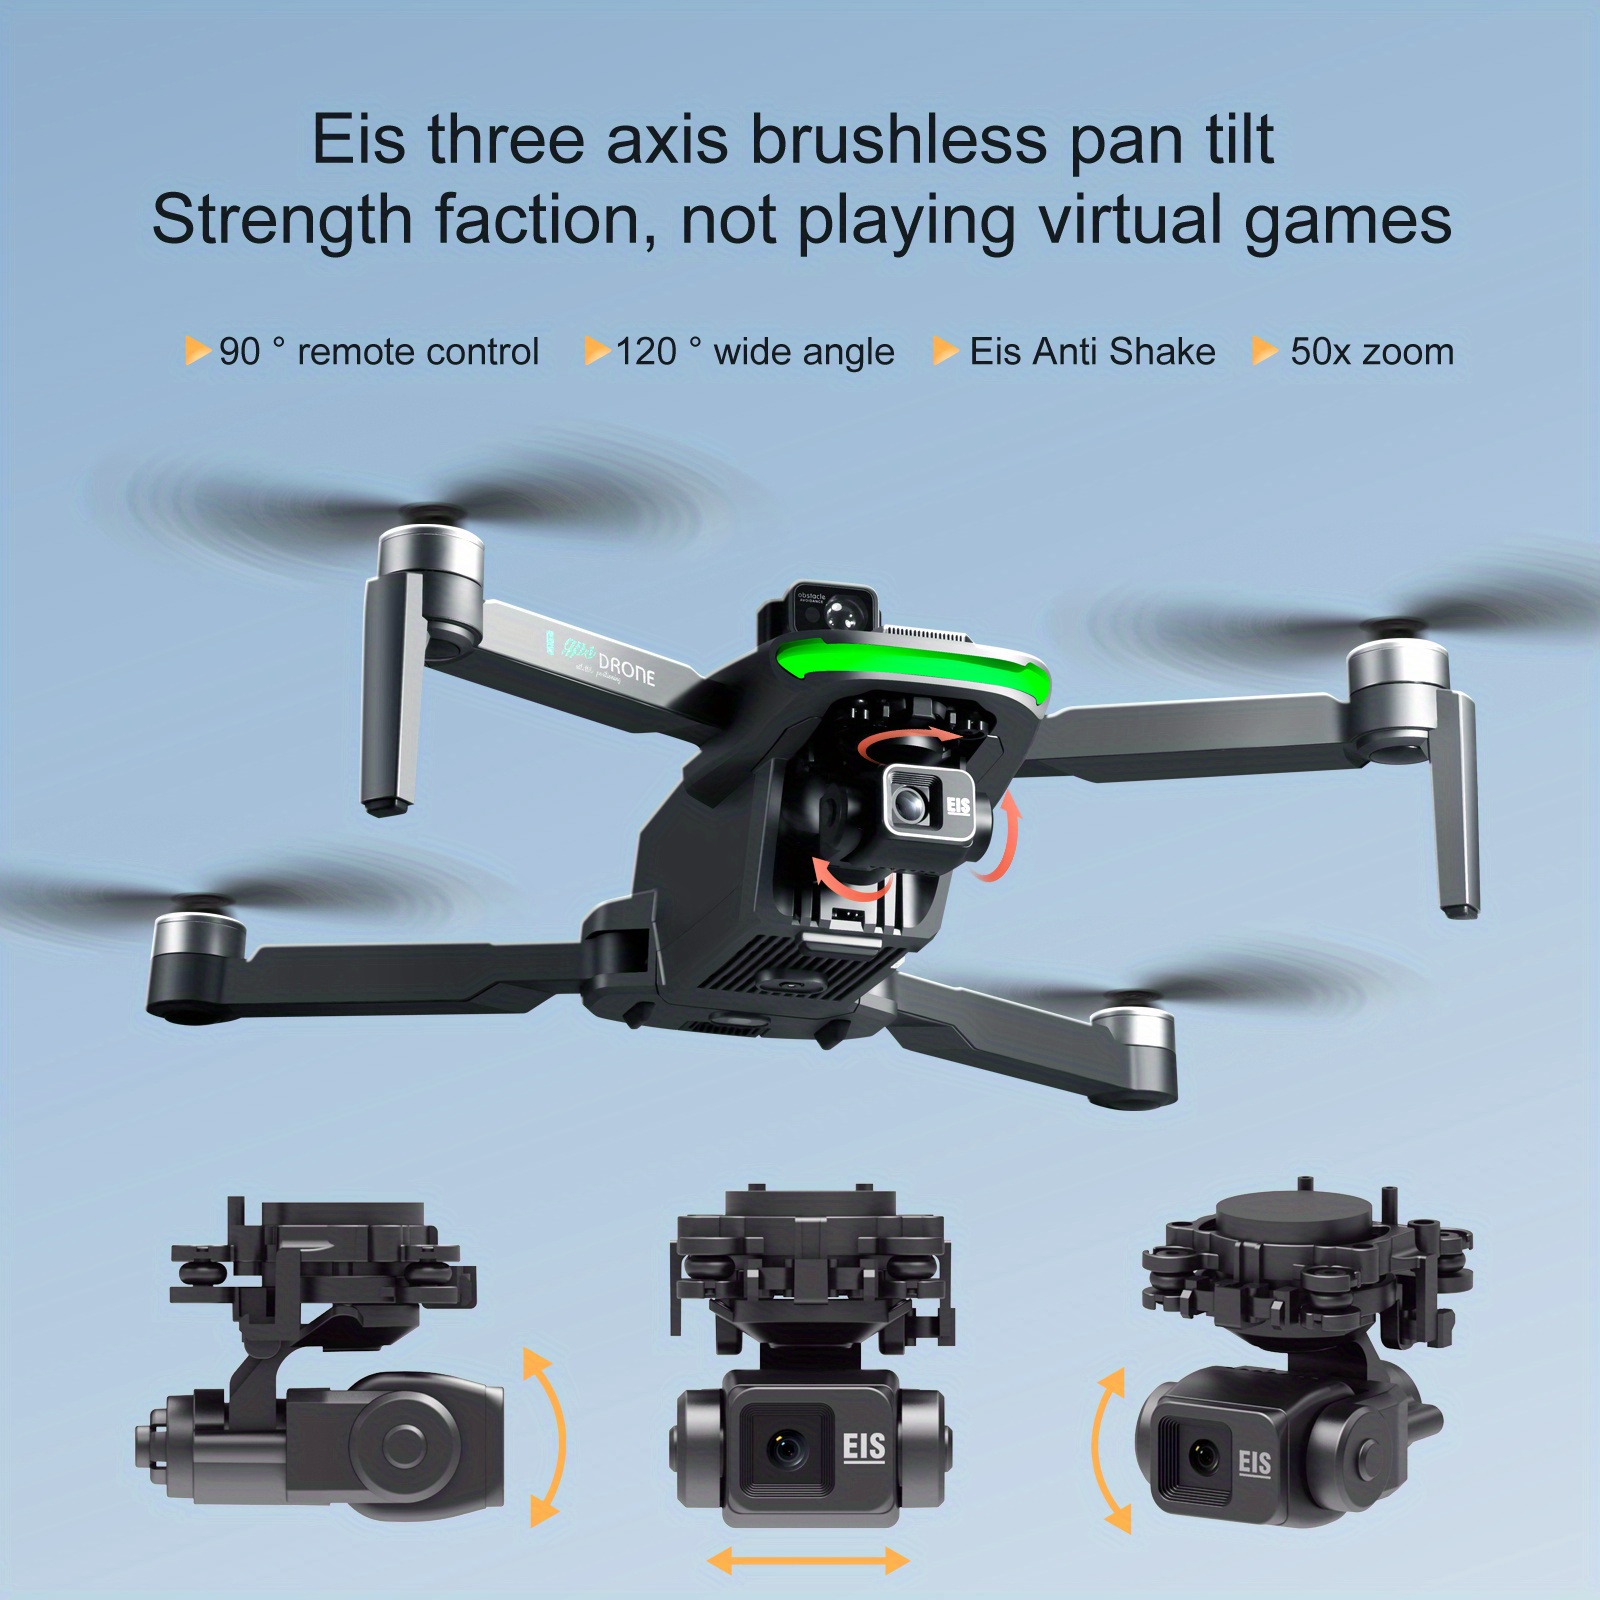 s155 professional drone uav quadcopter get the most out of your flight with gps relay brushless motor 500g payload 3 axis gimbal stabilizer christmas halloween thanksgiving gift details 2